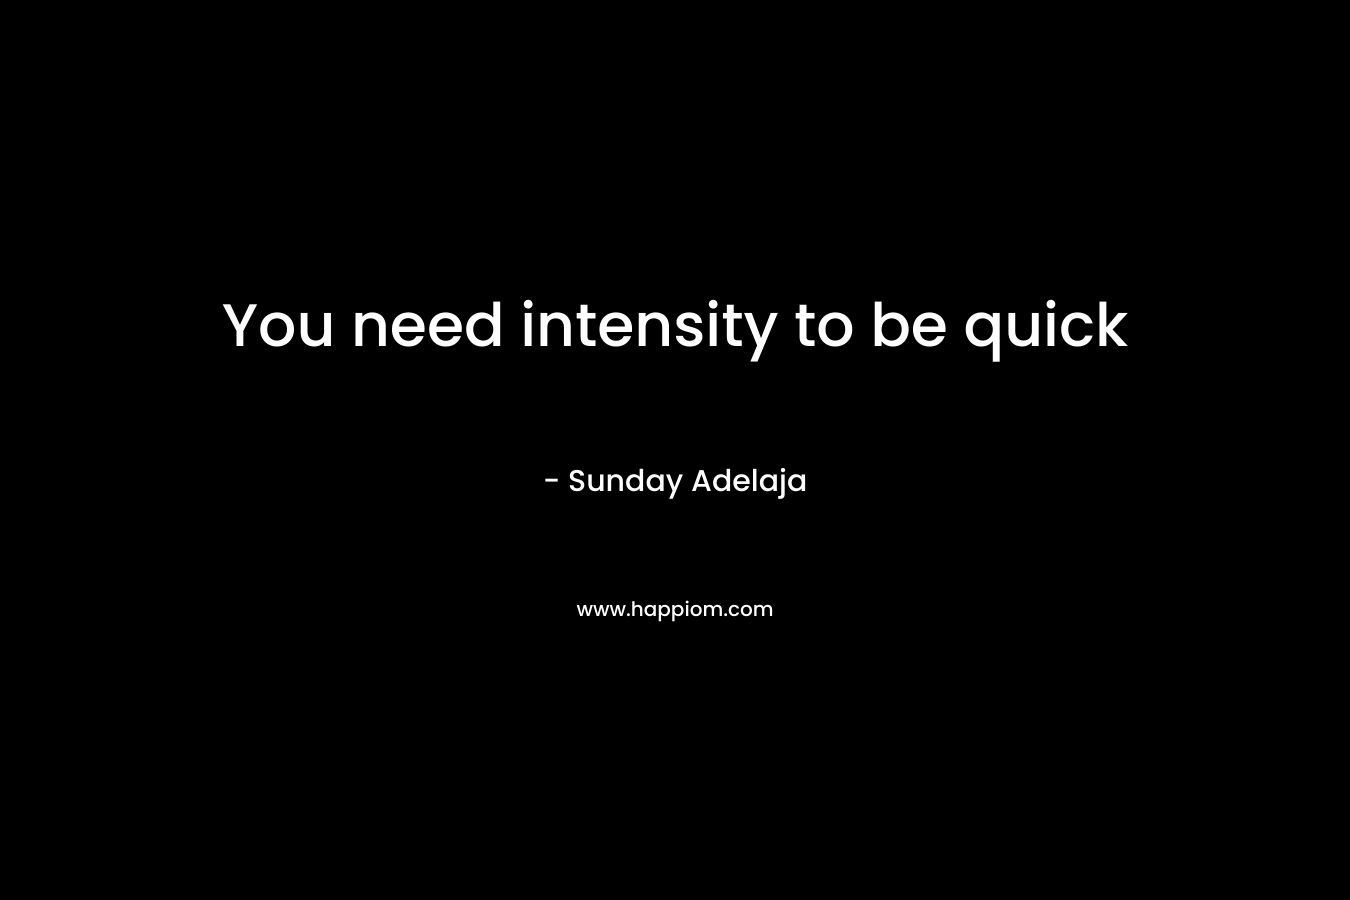 You need intensity to be quick